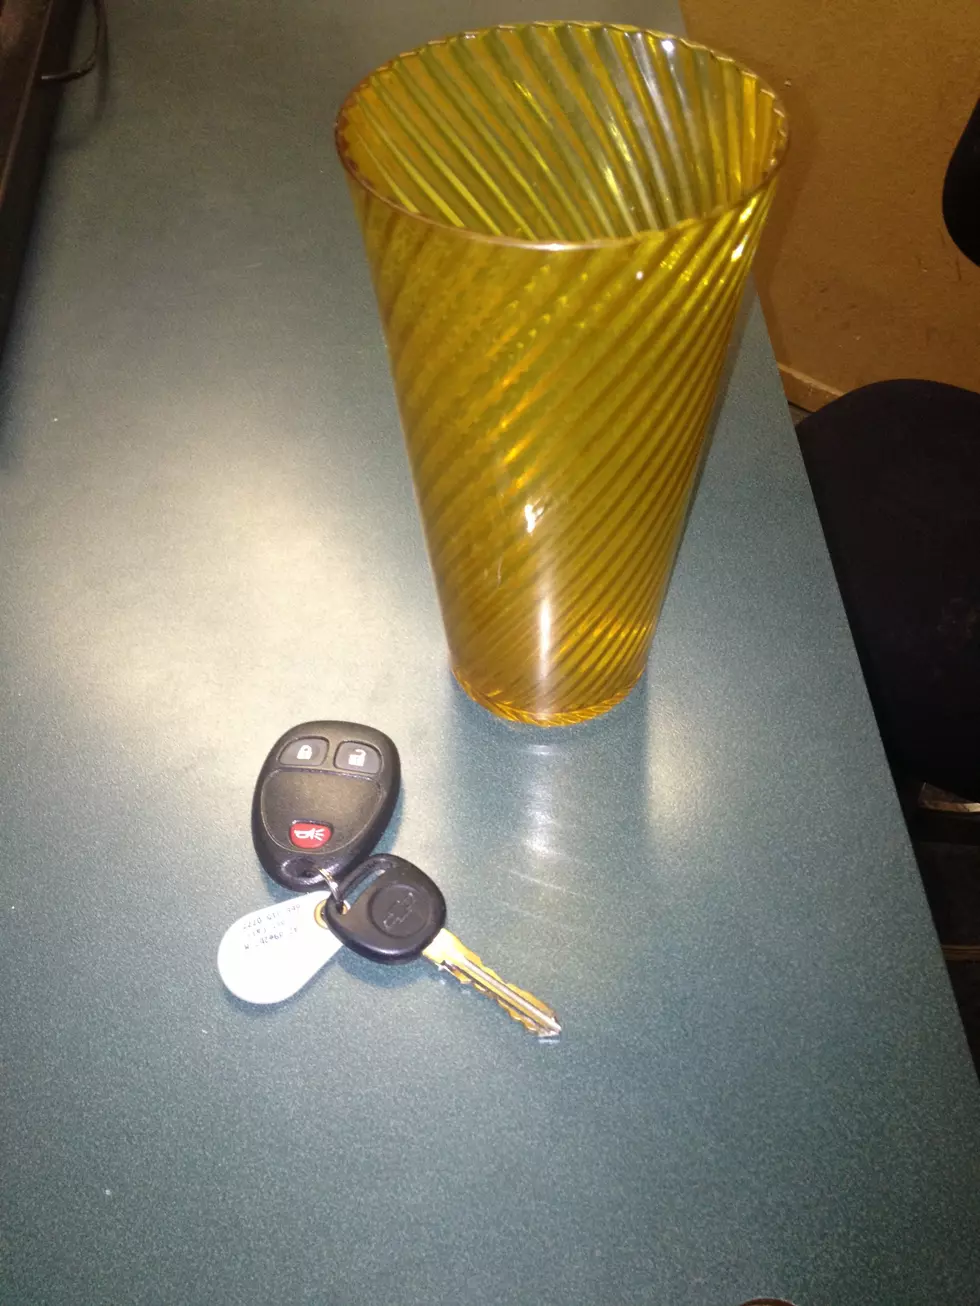 What Do Three Badges, A Cup, Keys, and a PASS Have In Common?